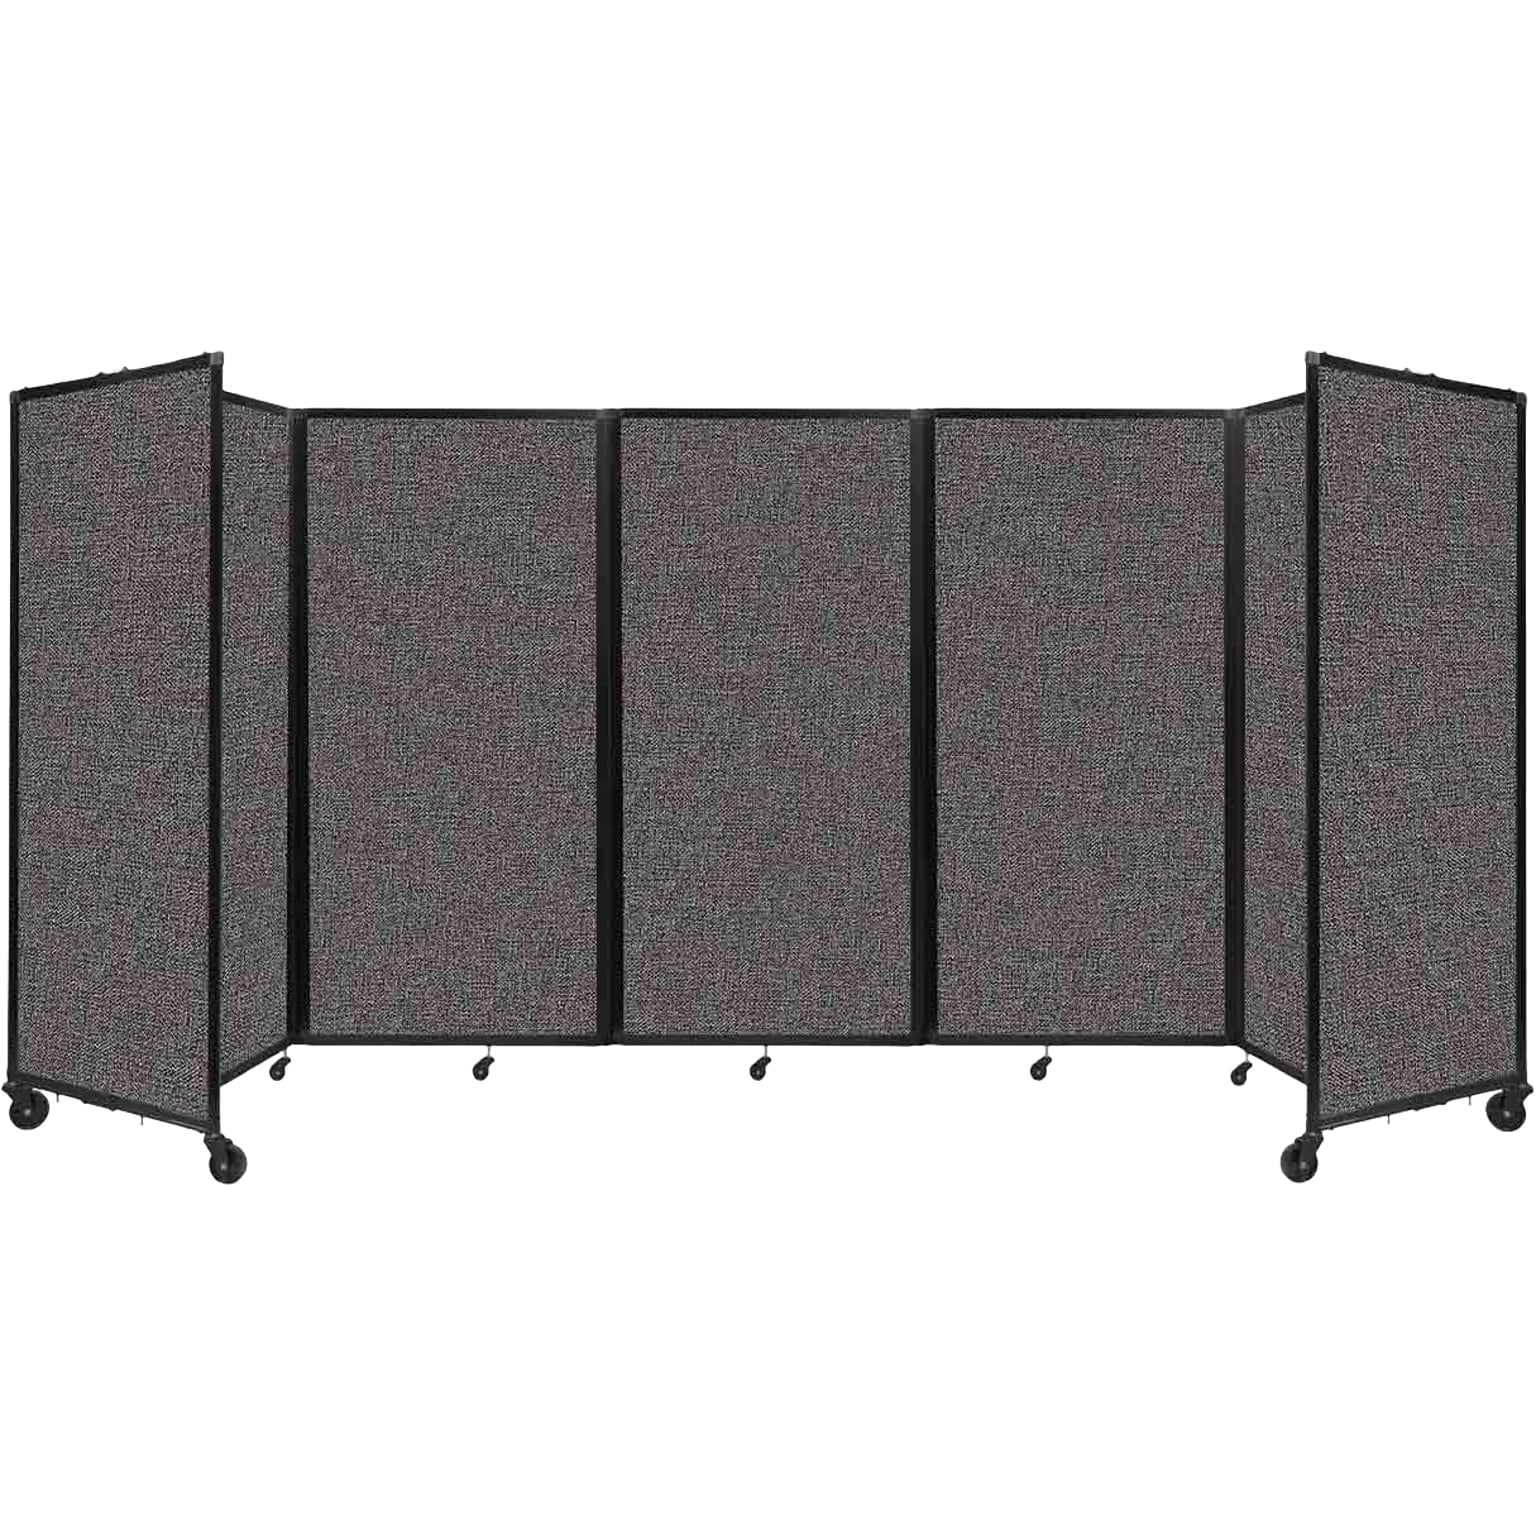 Versare The Room Divider 360 Freestanding Mobile Partition, 72H x 168W, Charcoal Gray Fabric (1172507)